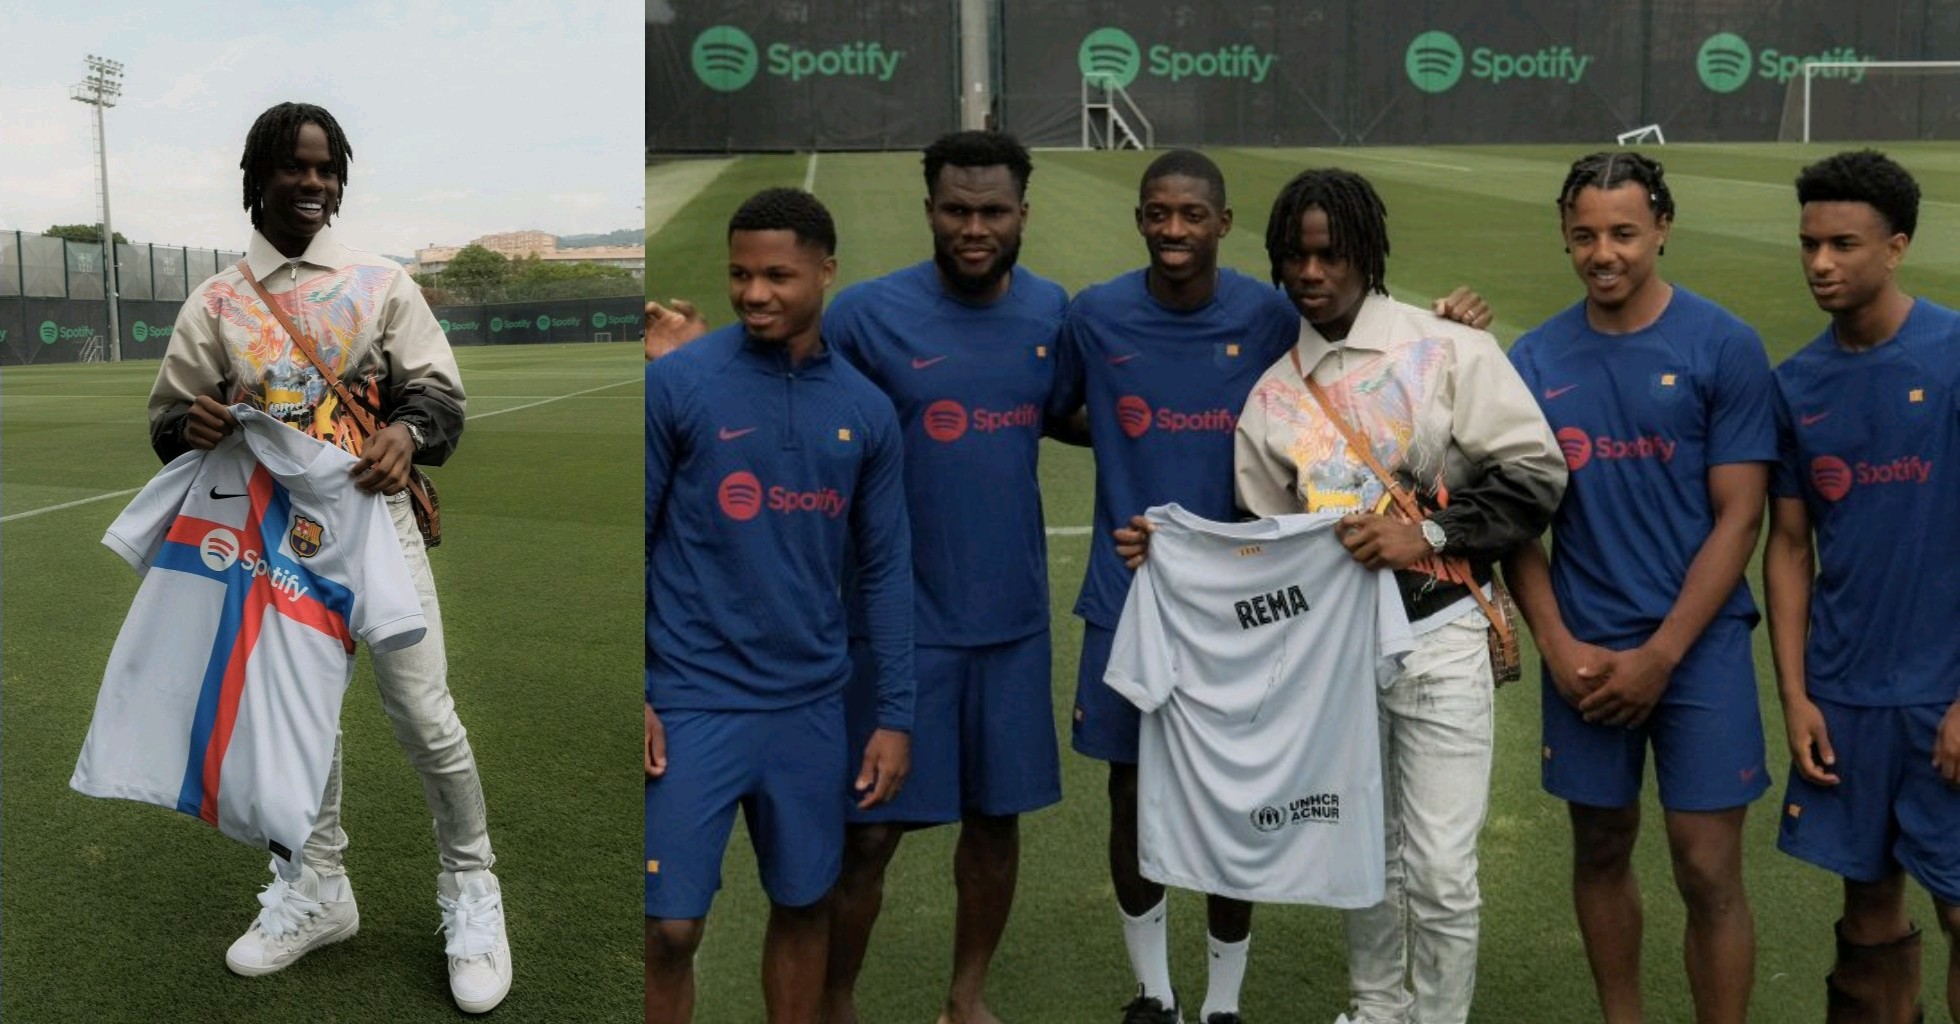 Rema visits Barcelona stars Dembele, Ansu Fati, others during training; gets customised jersey